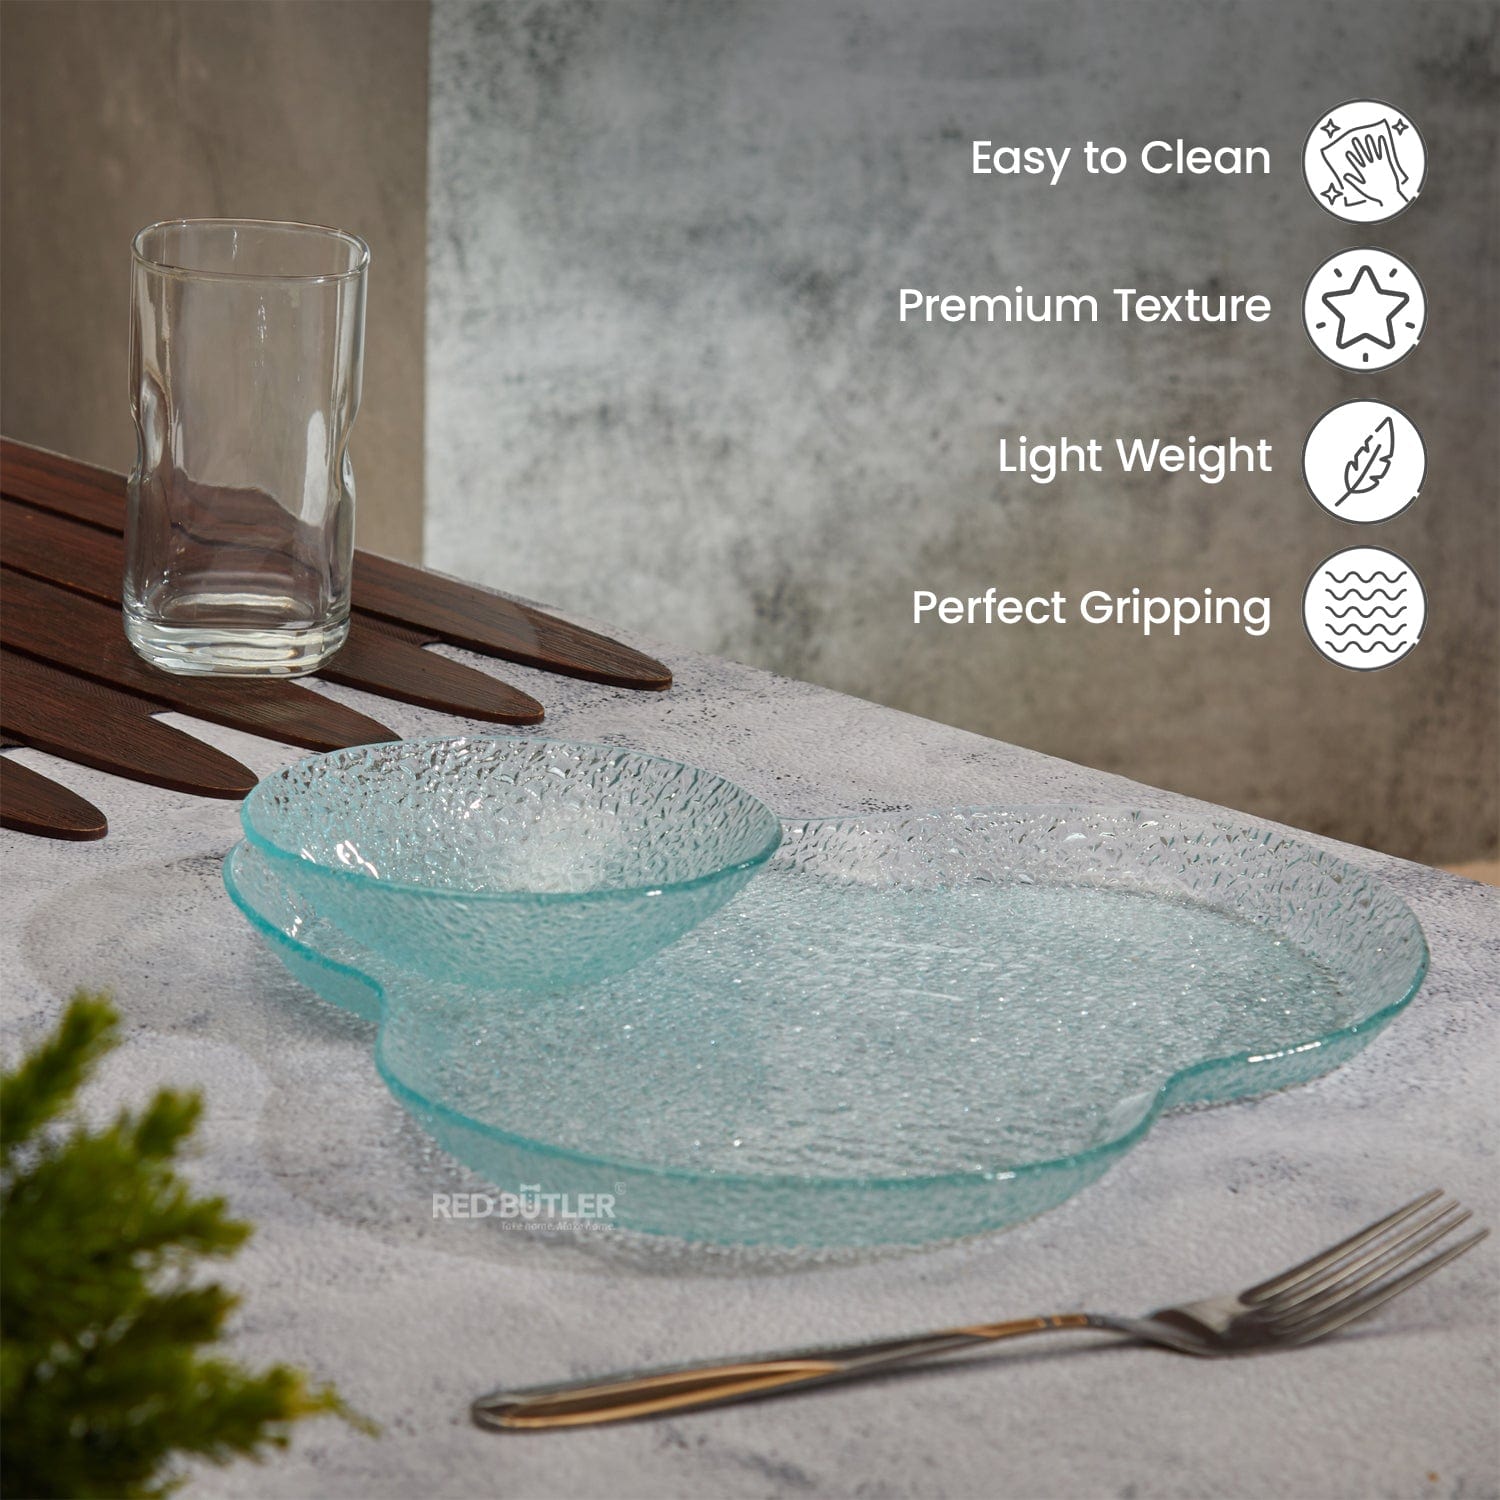 Red Butler Platter Glass Platter with Dip Bowl GCD26A1 Elegant Glass Platters with Bowl for Stylish Serving Chic Tableware Redbutler